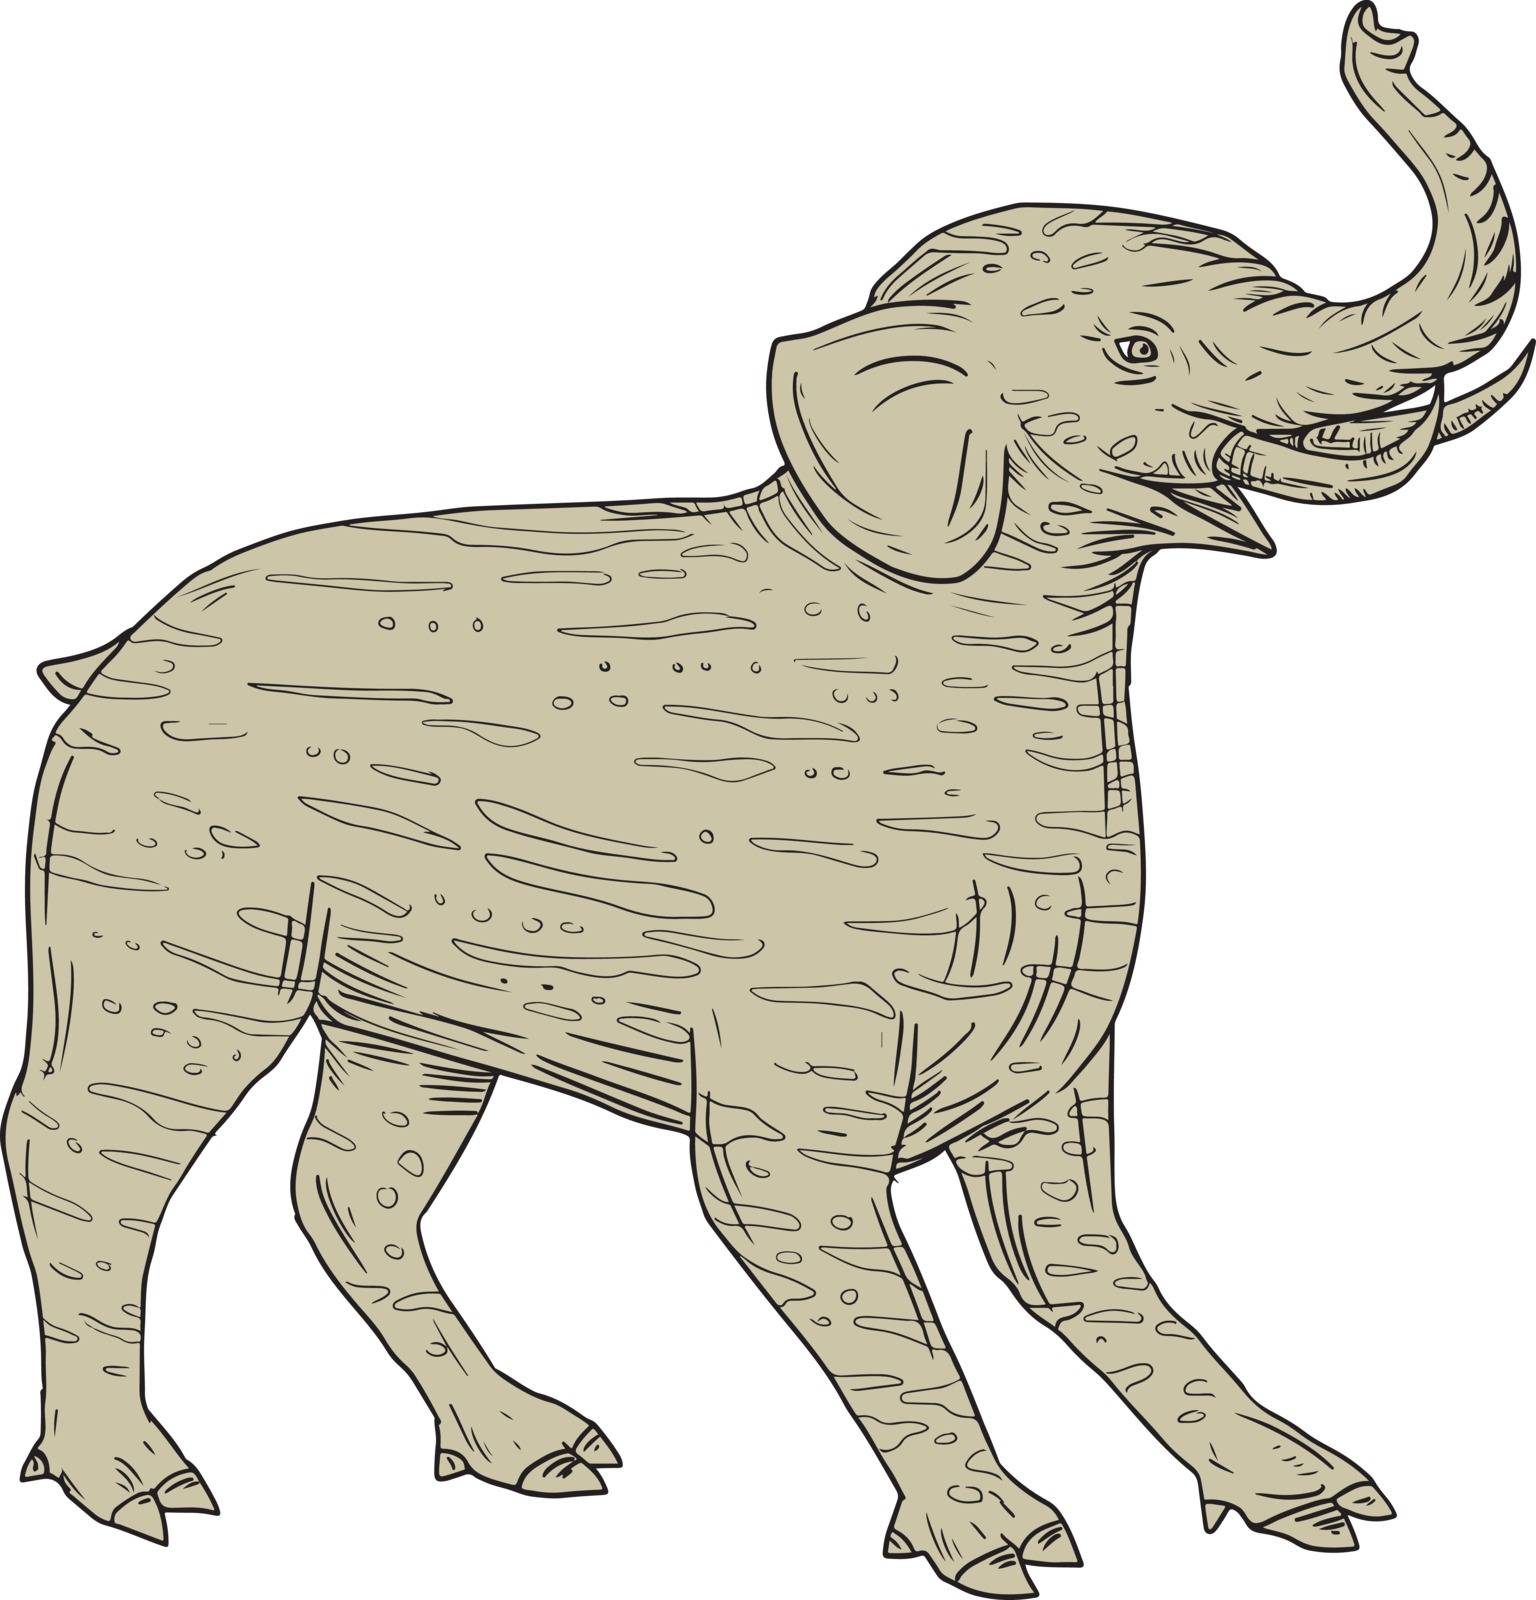 Drawing sketch style illustration of a Baku, a Chinese and Japanese Folklore tapir-like creature with elephantine tusks and trunk and with striped fur viewed from the side set on isolated white background. 